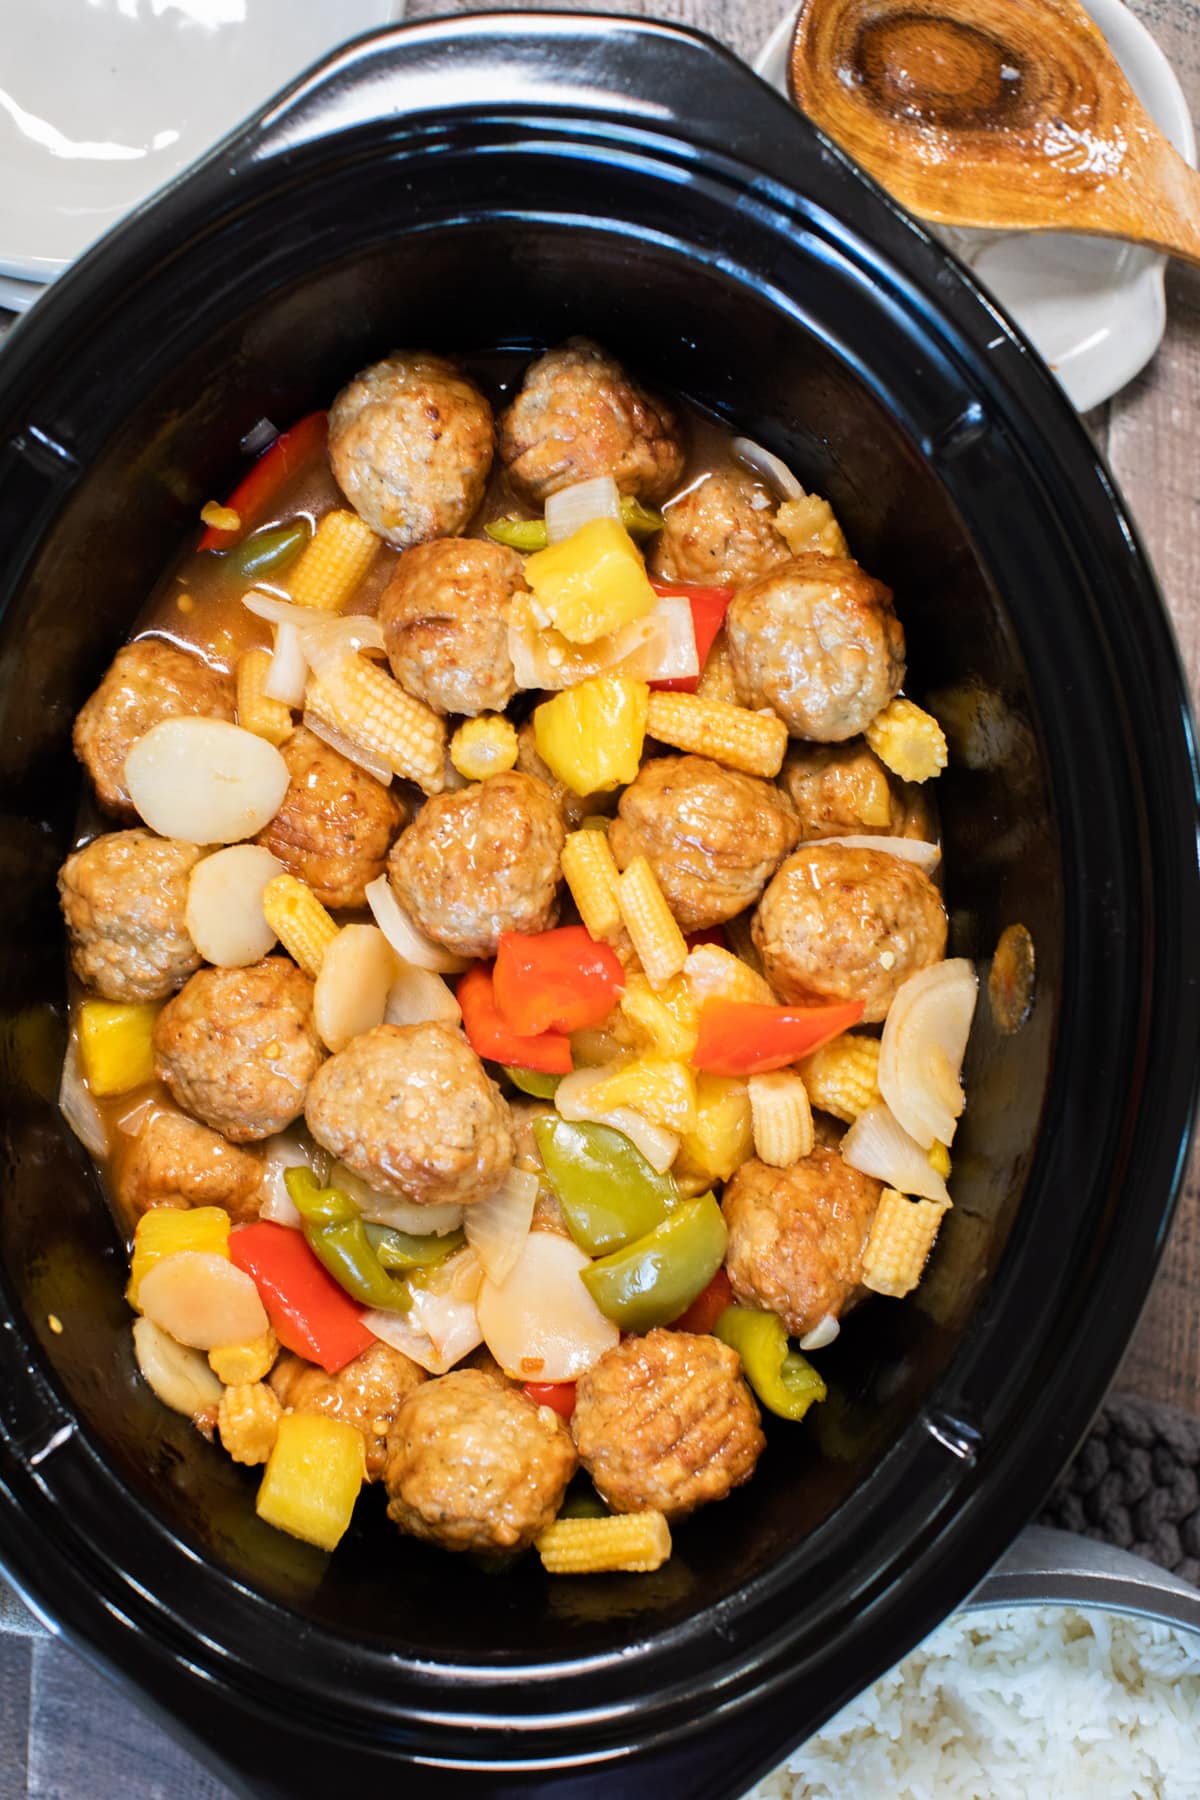 done cooking sweet and sour meatballs in slow cooker